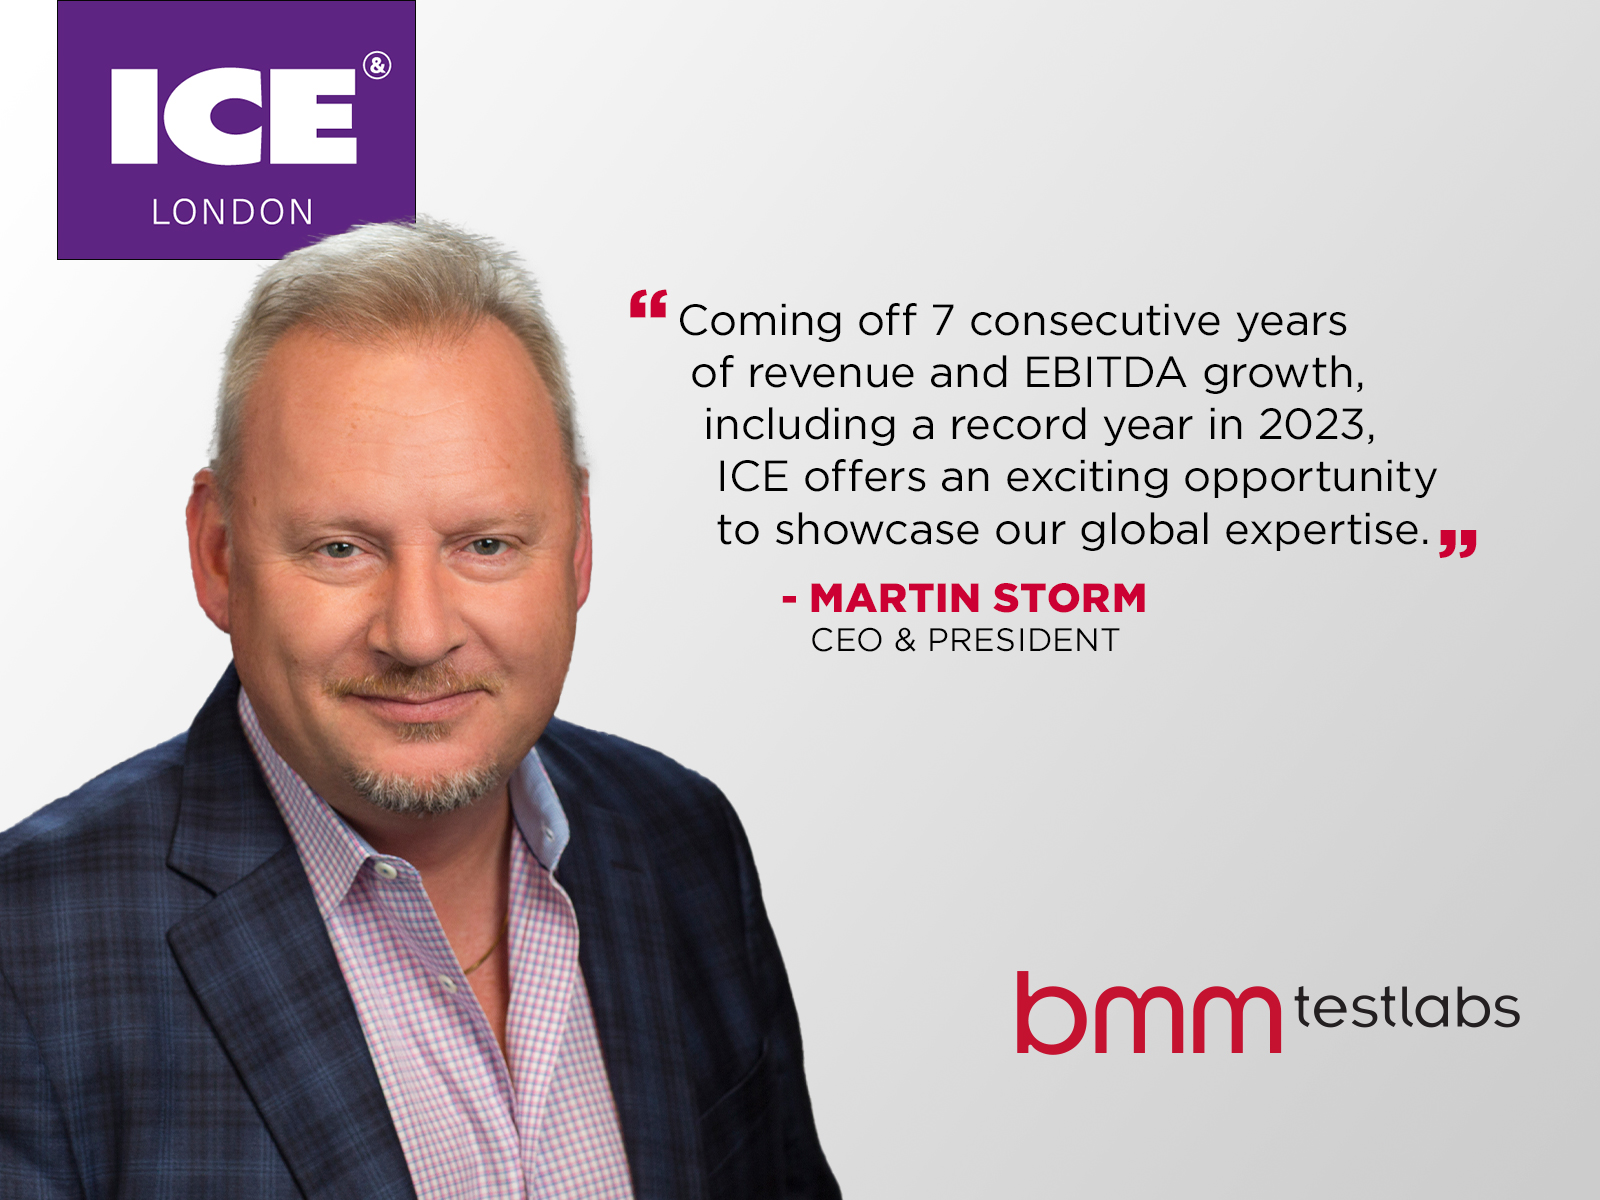 BMM Innovation Group “BIG” Brings Its Global Expertise To ICE London February 6-8